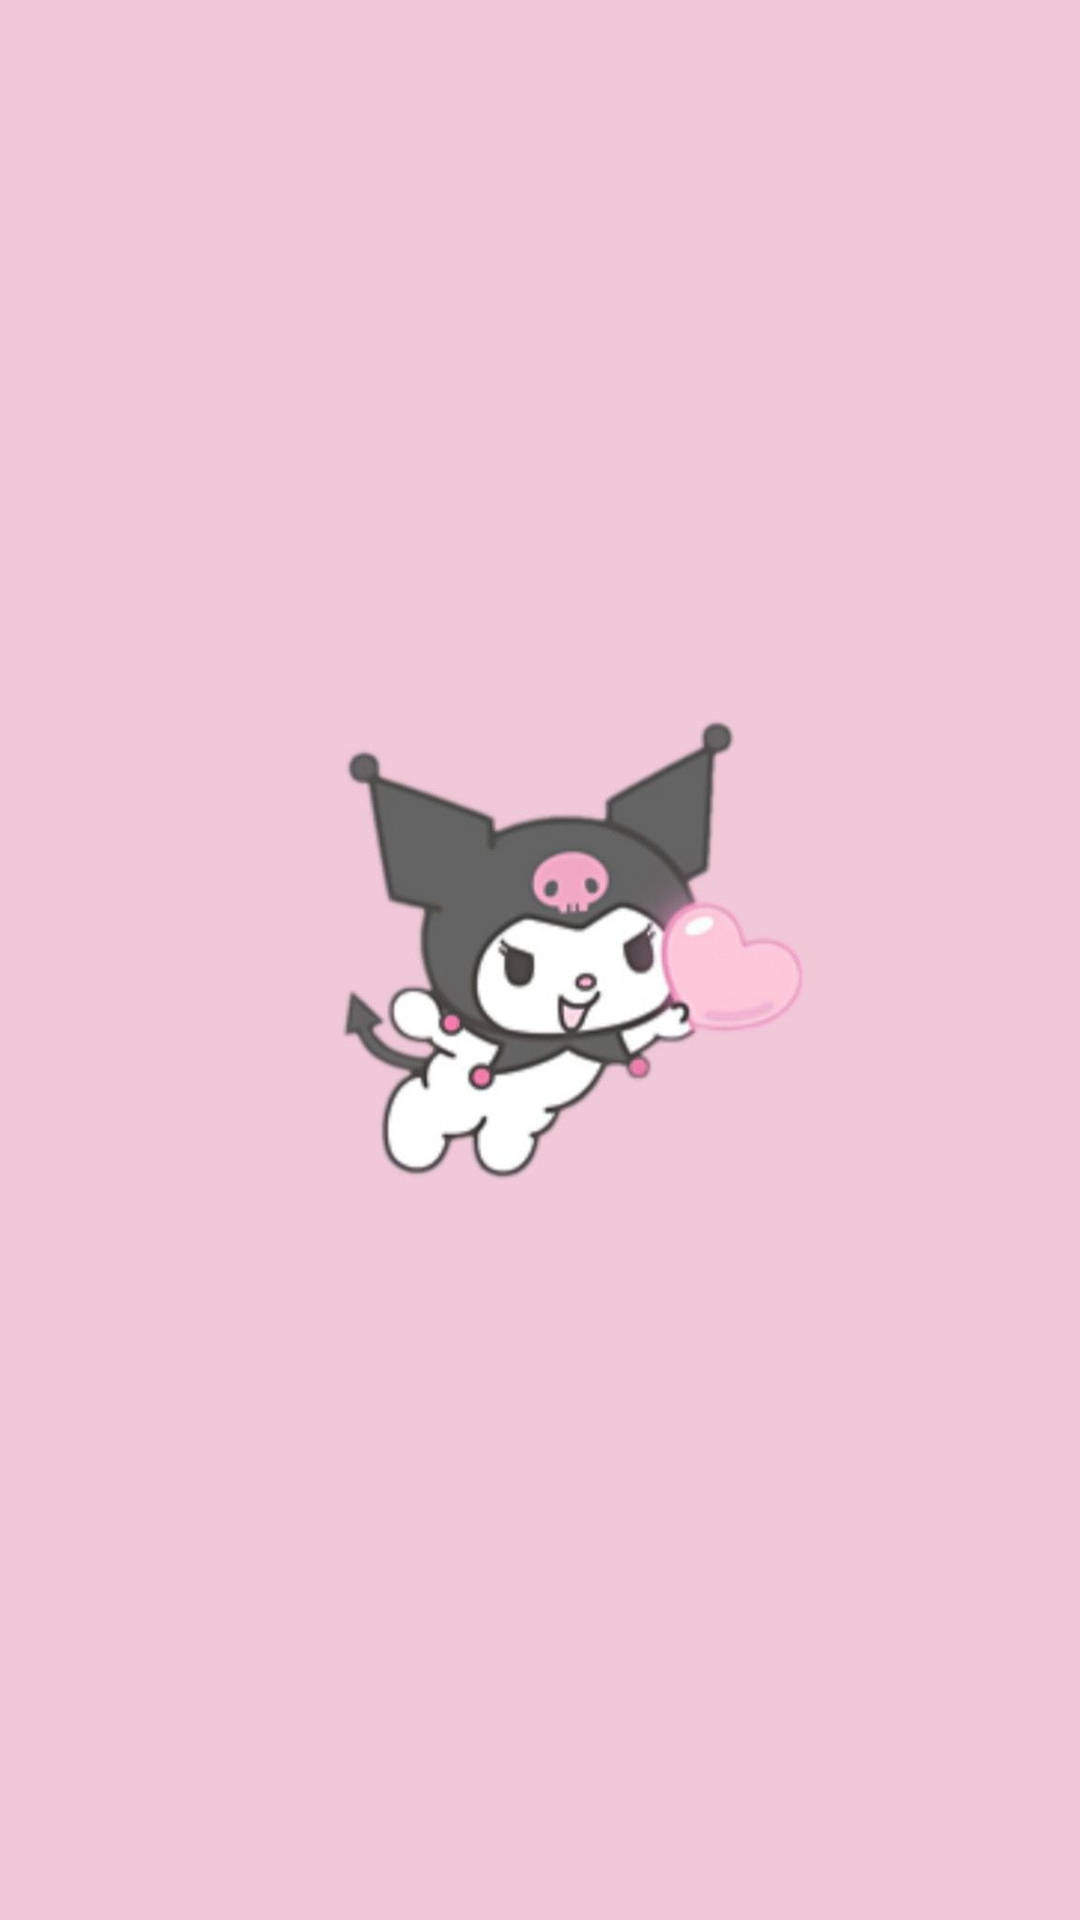 Rival Of My Melody Kuromi Holding Heart Wallpaper